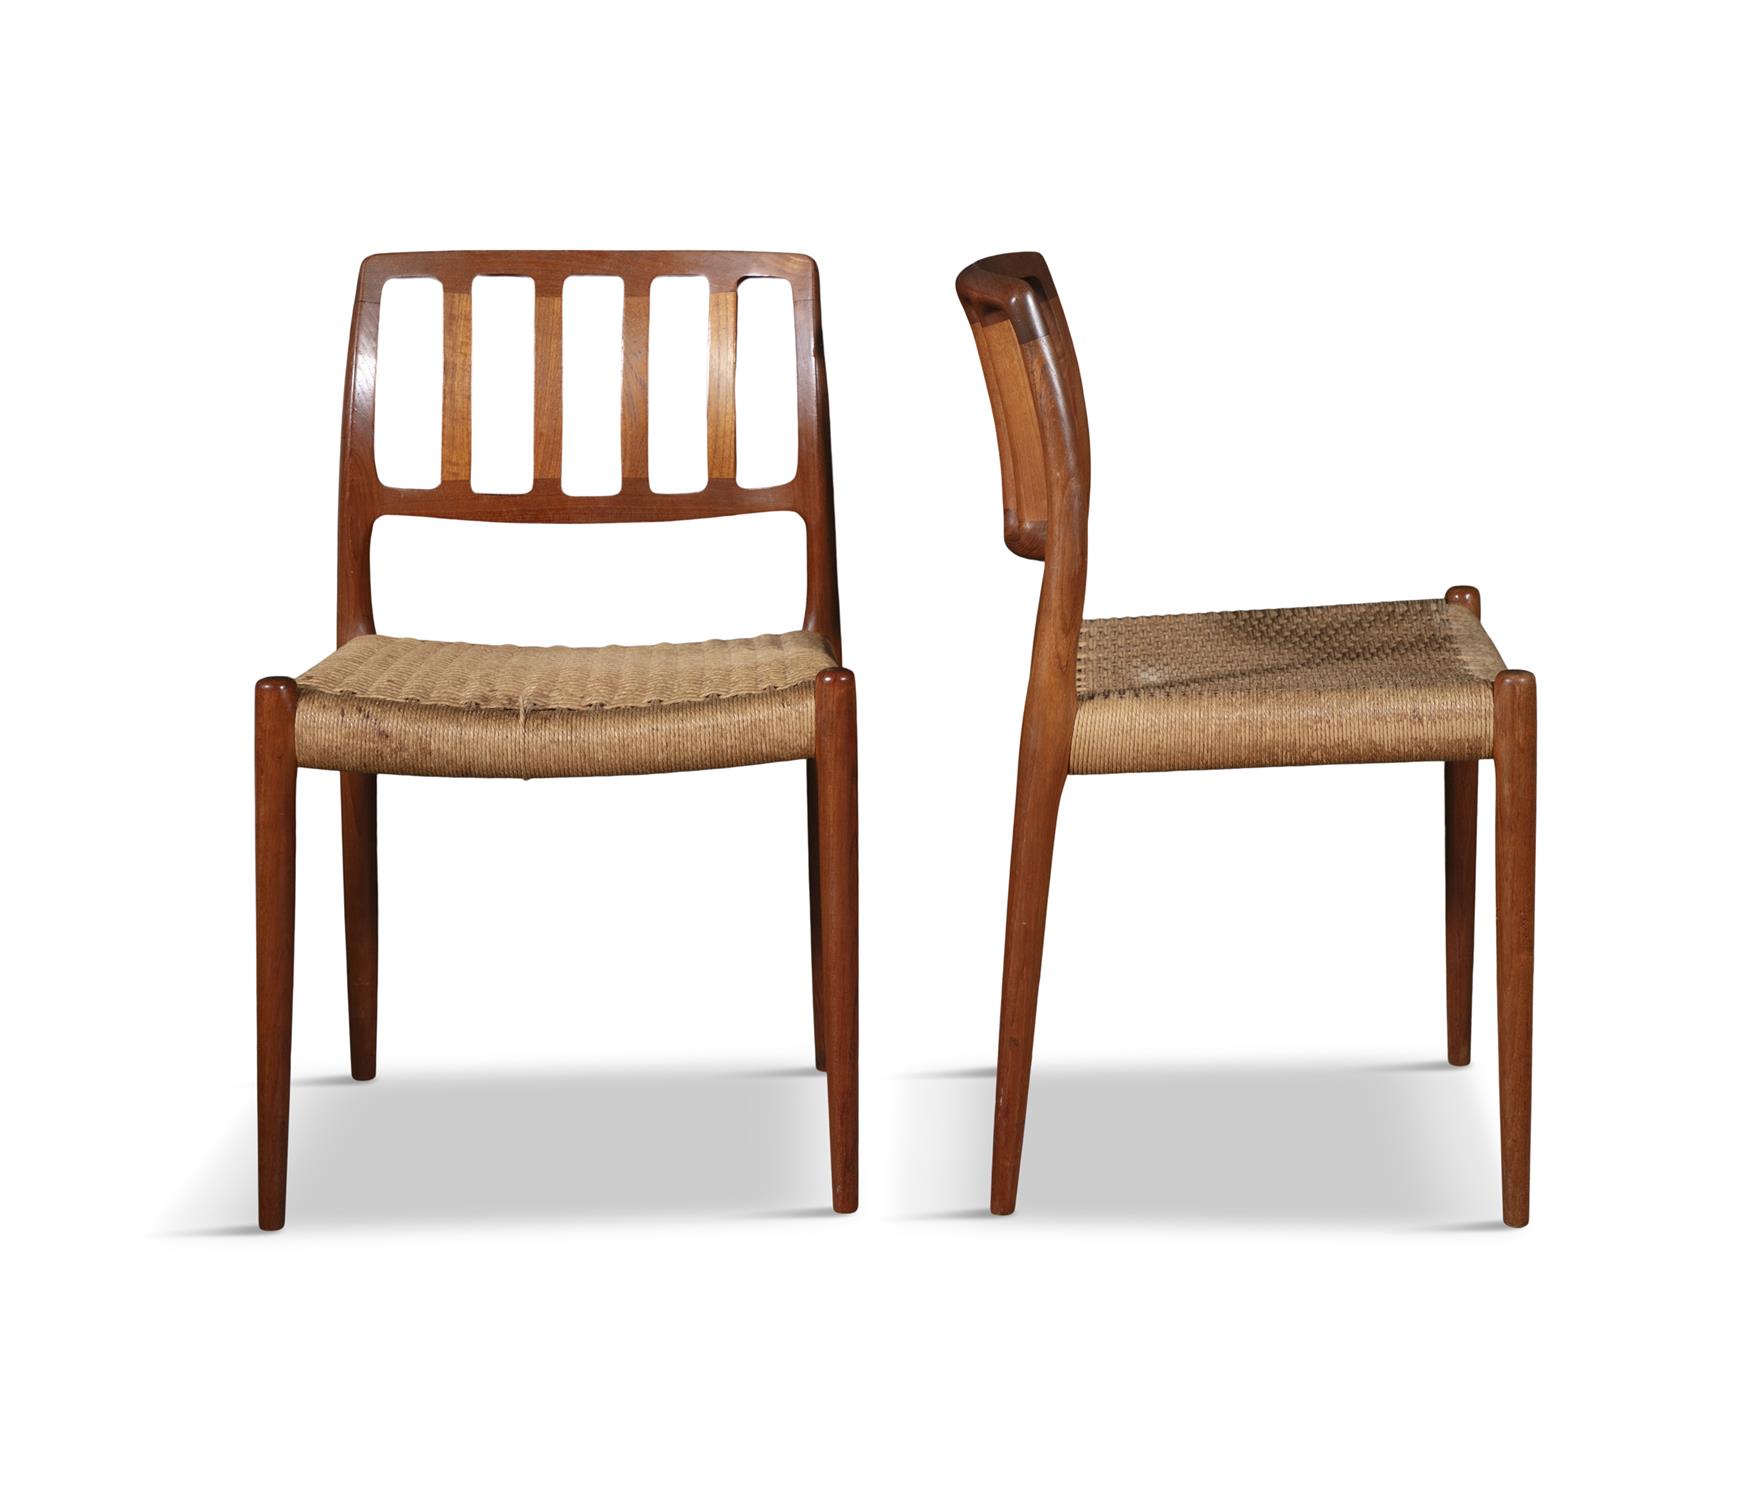 NEILS OTTO MØLLER (1920 - 1982) A set of six cane work dining chairs by Niels Otto Møller. - Image 5 of 5